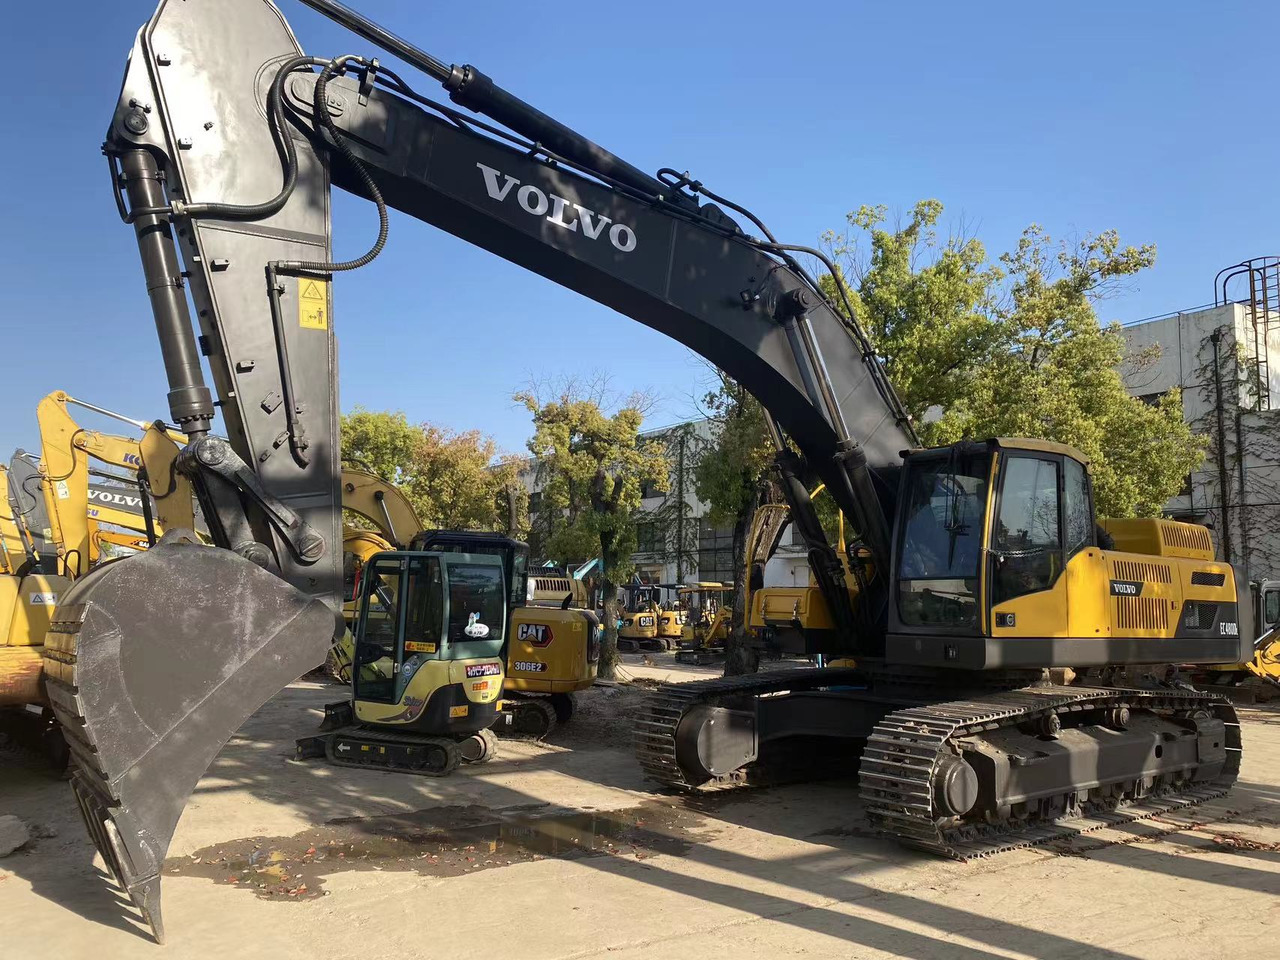 Hot selling original made Used excavator VOLVO EC480DL in stock low price for sale lizingą Hot selling original made Used excavator VOLVO EC480DL in stock low price for sale: foto 5